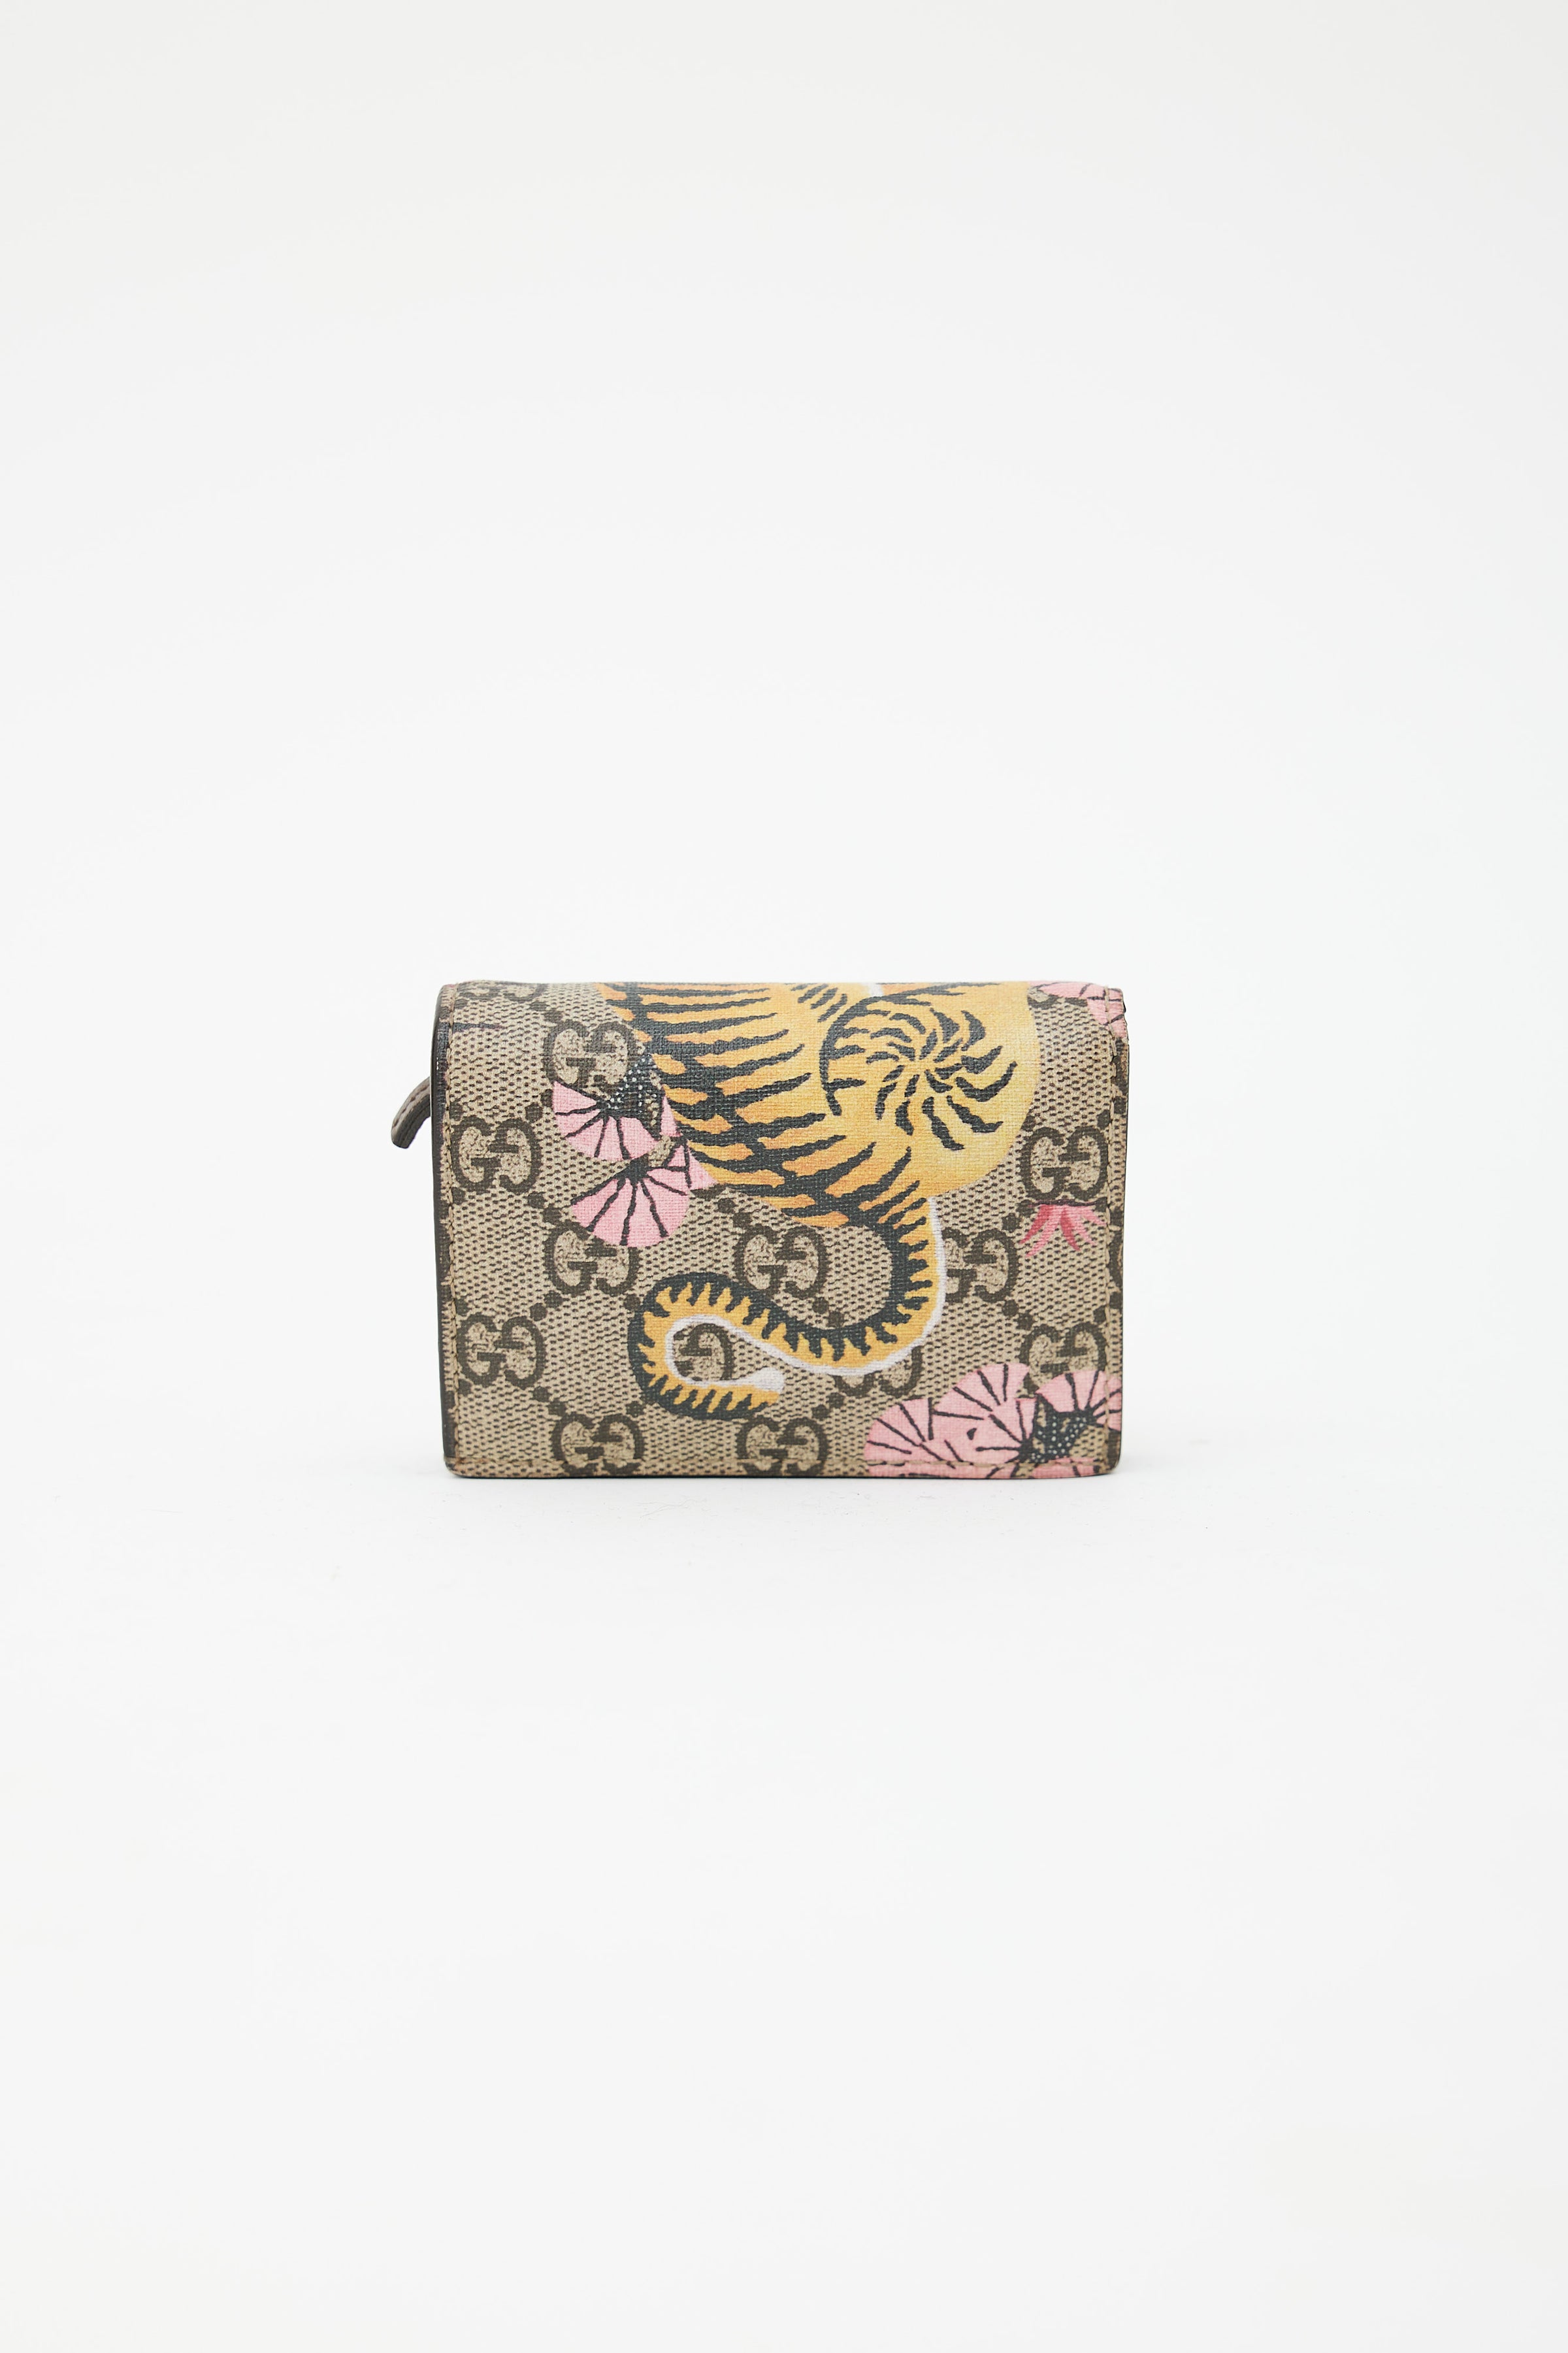 GUCCI: New Web wallet in GG Supreme fabric - Beige